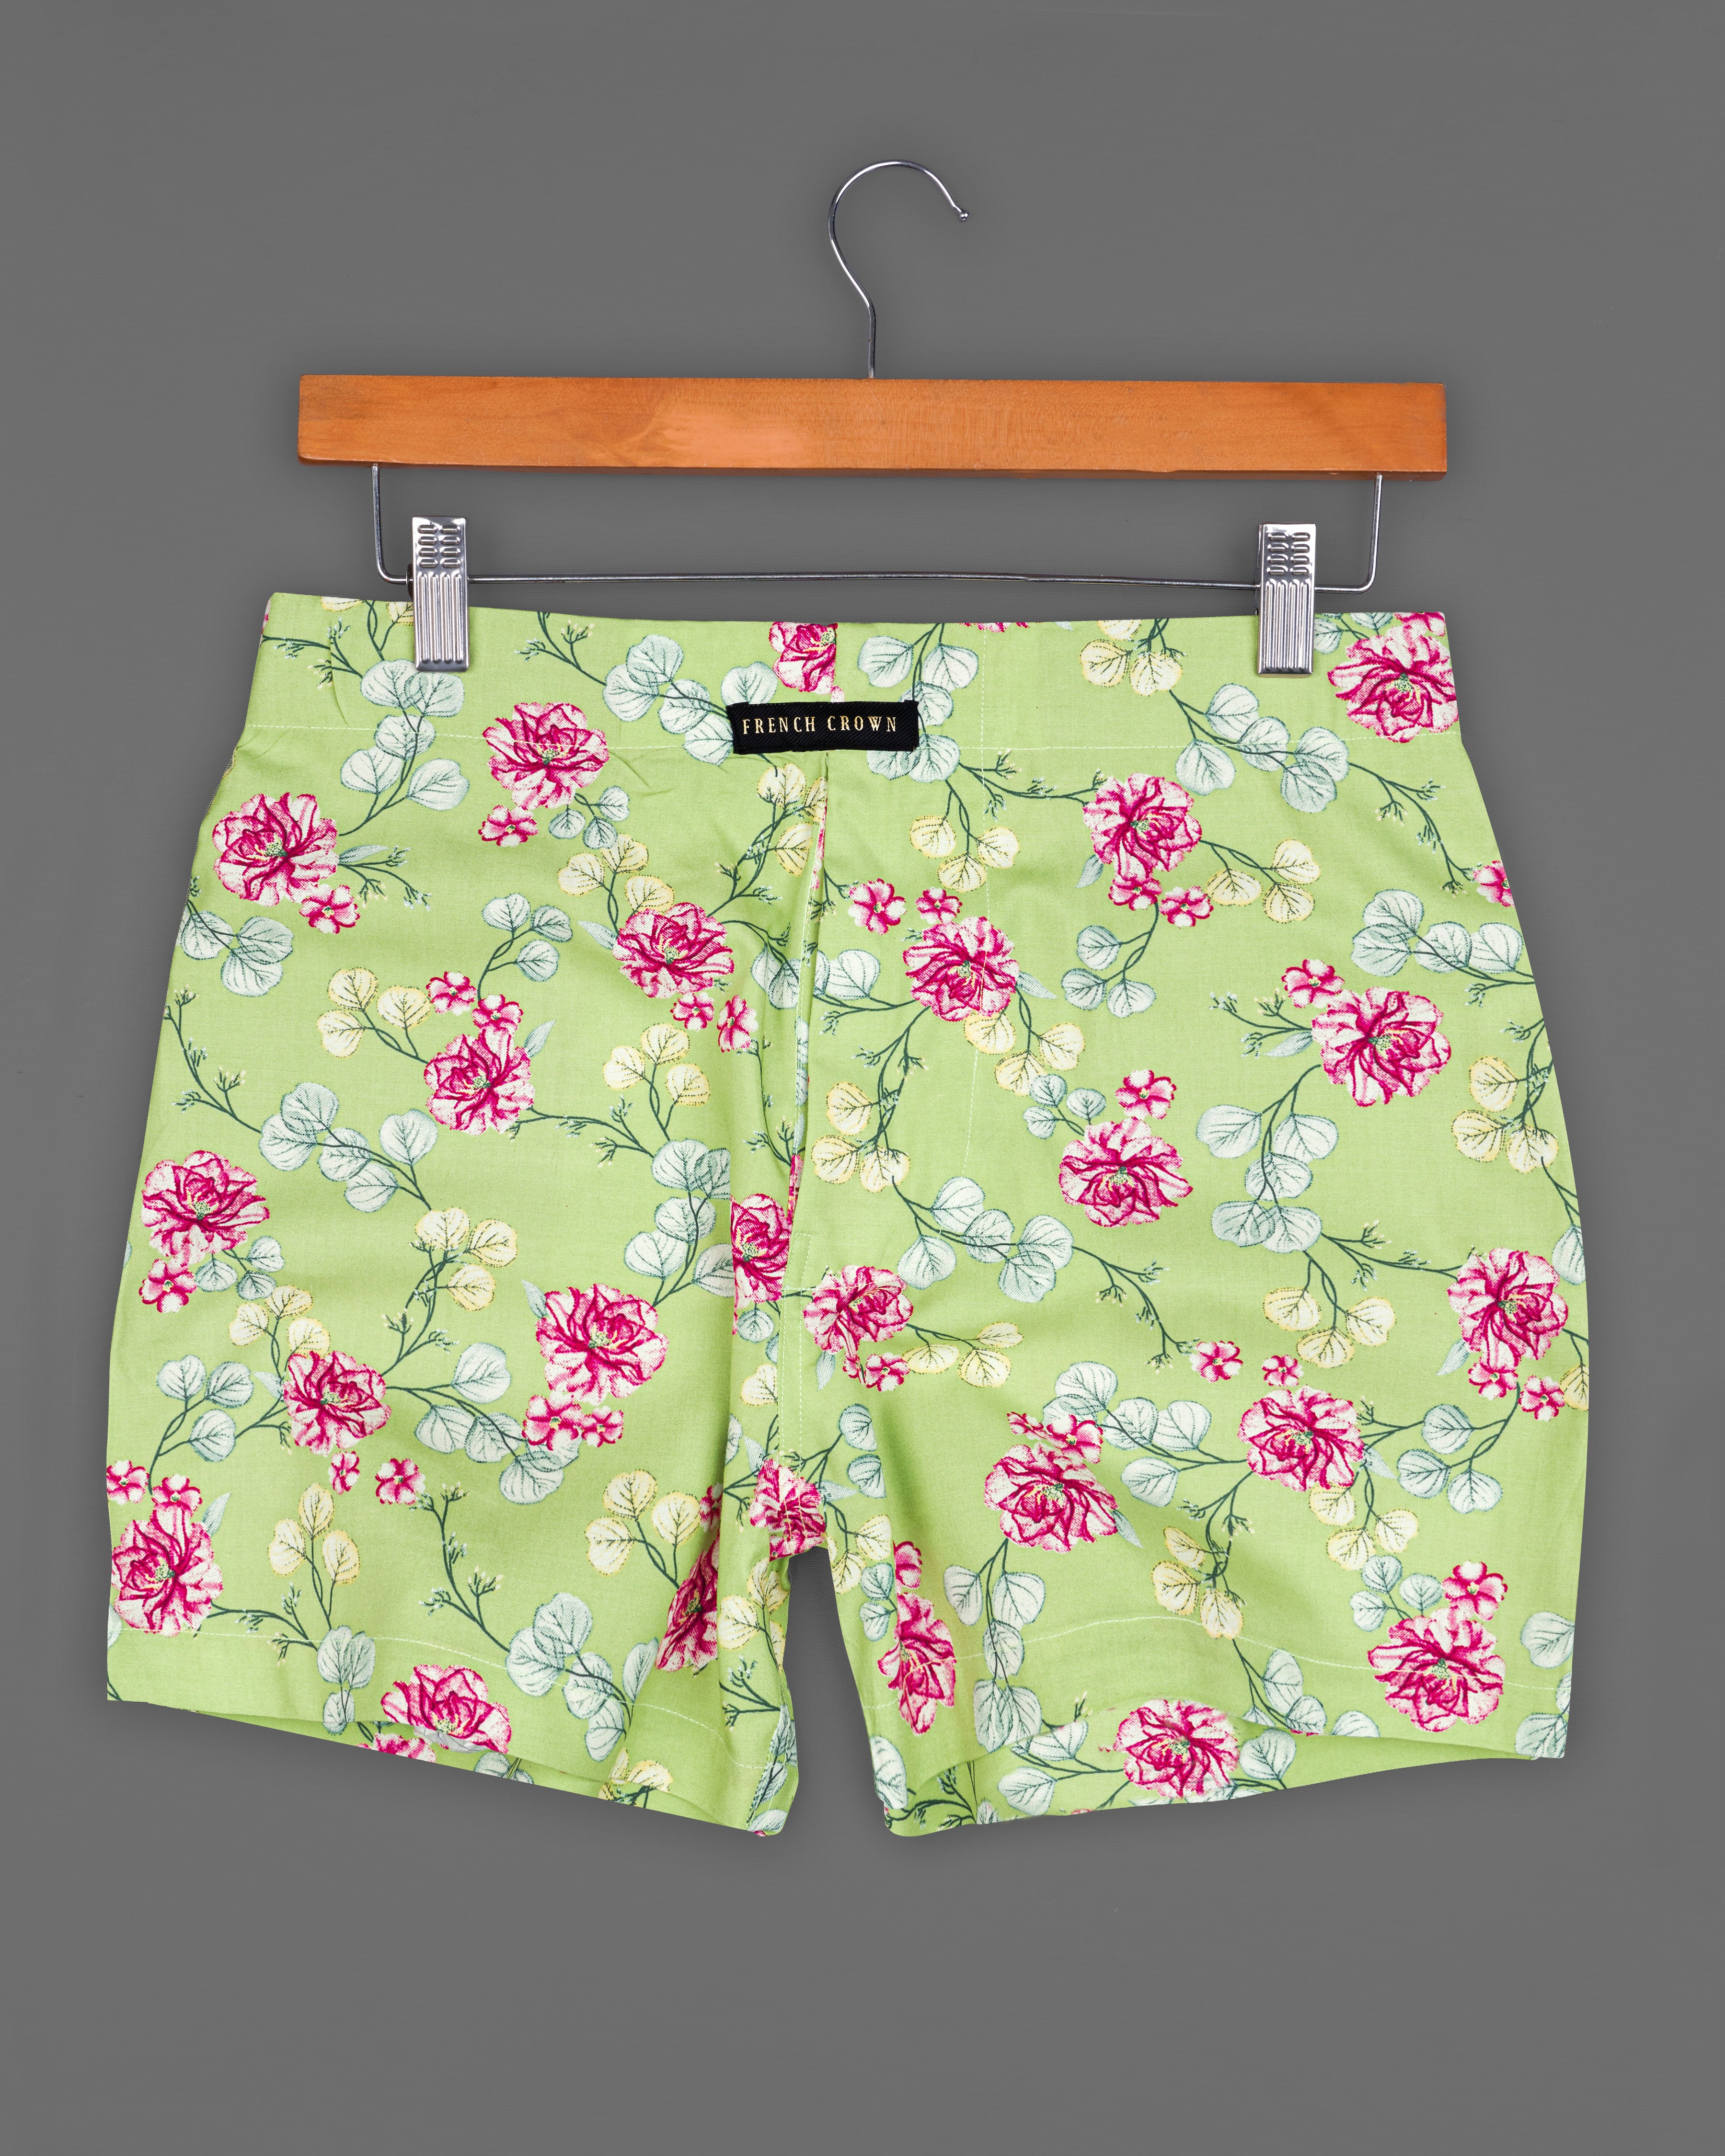 Desert Storm Textured Dobby With Spring Bud Floral Printed Premium Cotton Boxers BX480-BX499-28, BX480-BX499-30, BX480-BX499-32, BX480-BX499-34, BX480-BX499-36, BX480-BX499-38, BX480-BX499-40, BX480-BX499-42, BX480-BX499-44